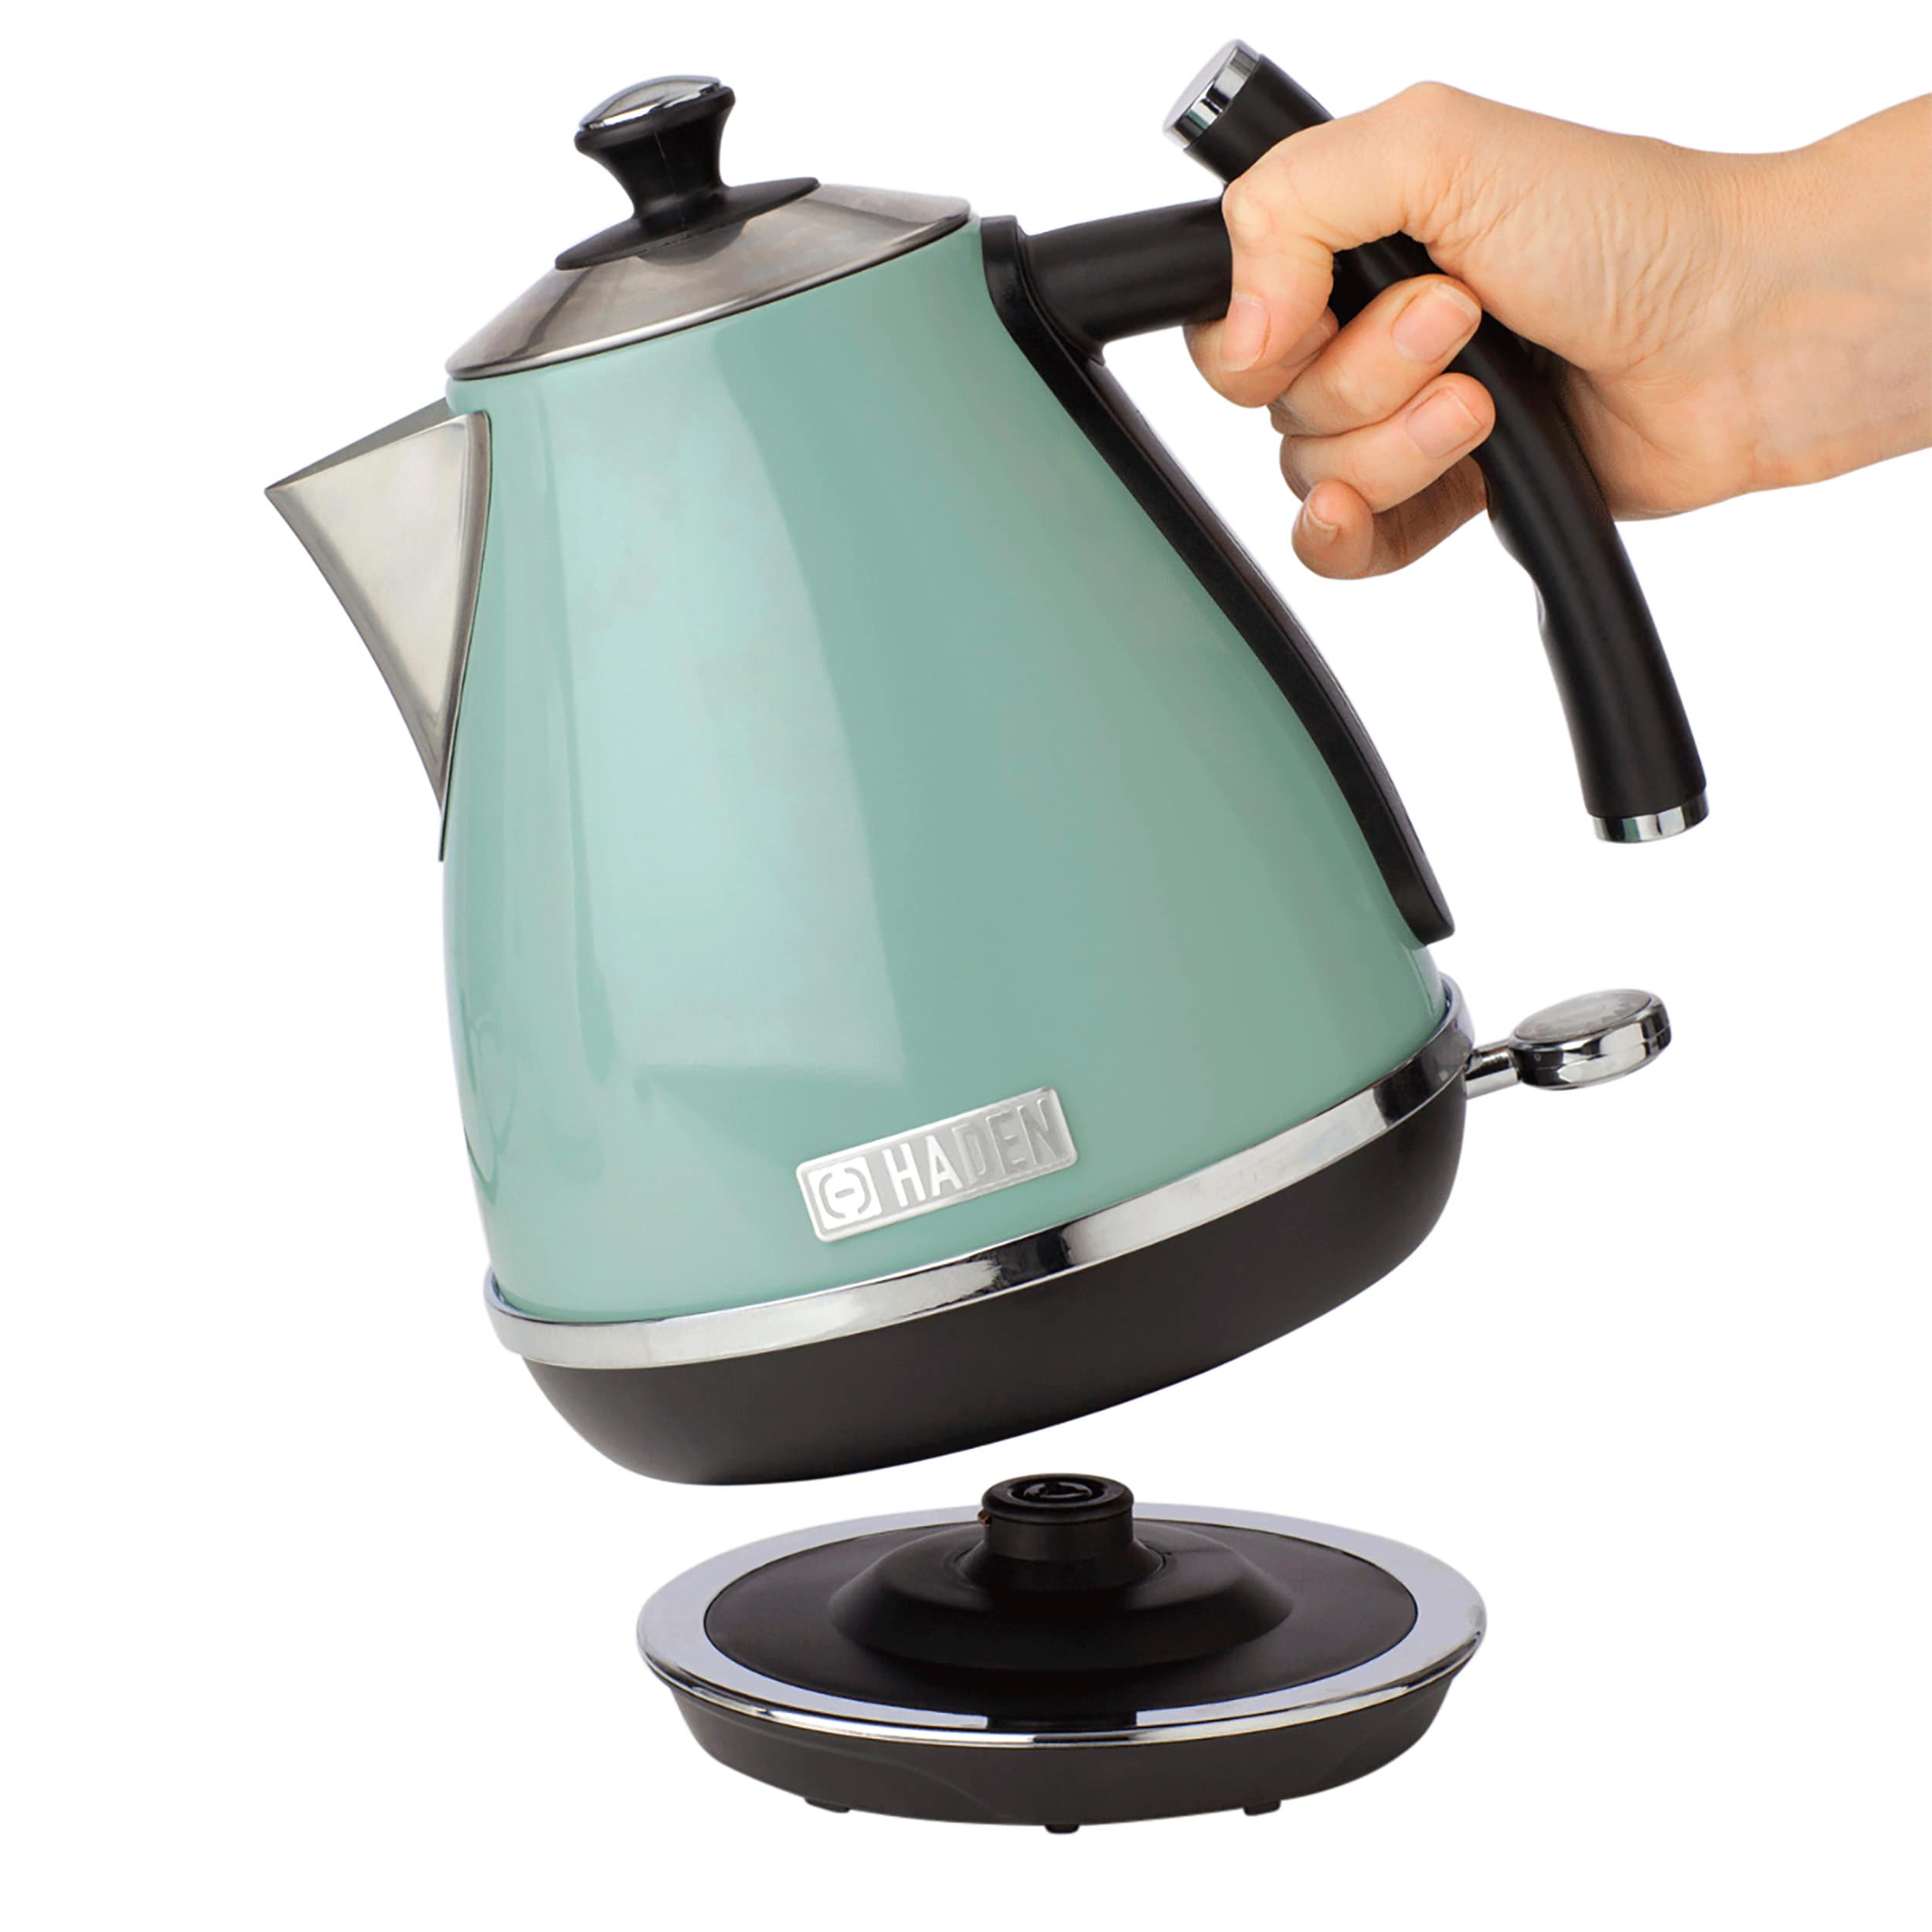 Haden Dorset 1.7 Liter Stainless Steel Electric Kettle with Auto